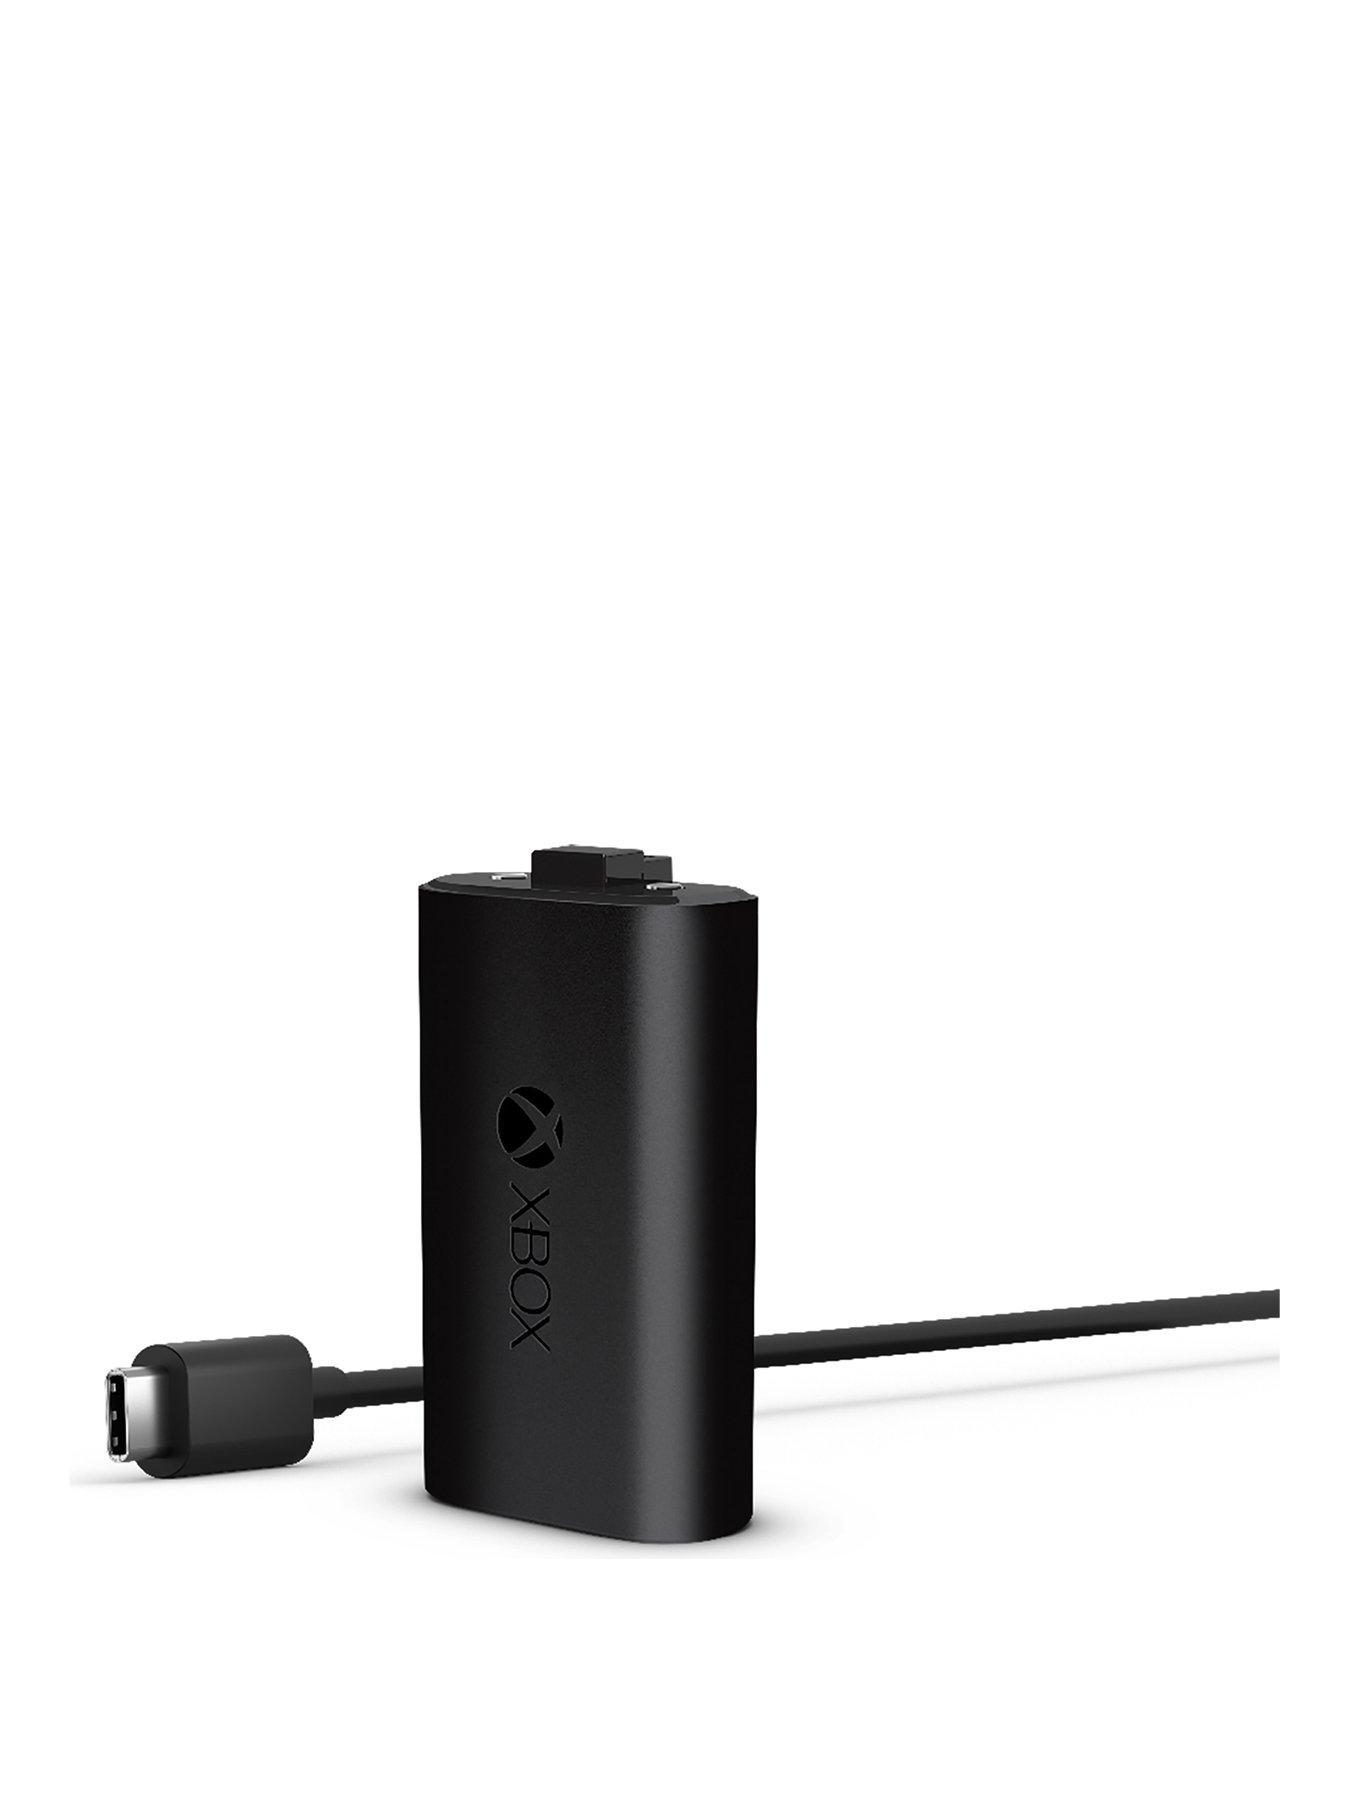 Microsoft Rechargeable Battery + USB-C Cable for Xbox Series X and